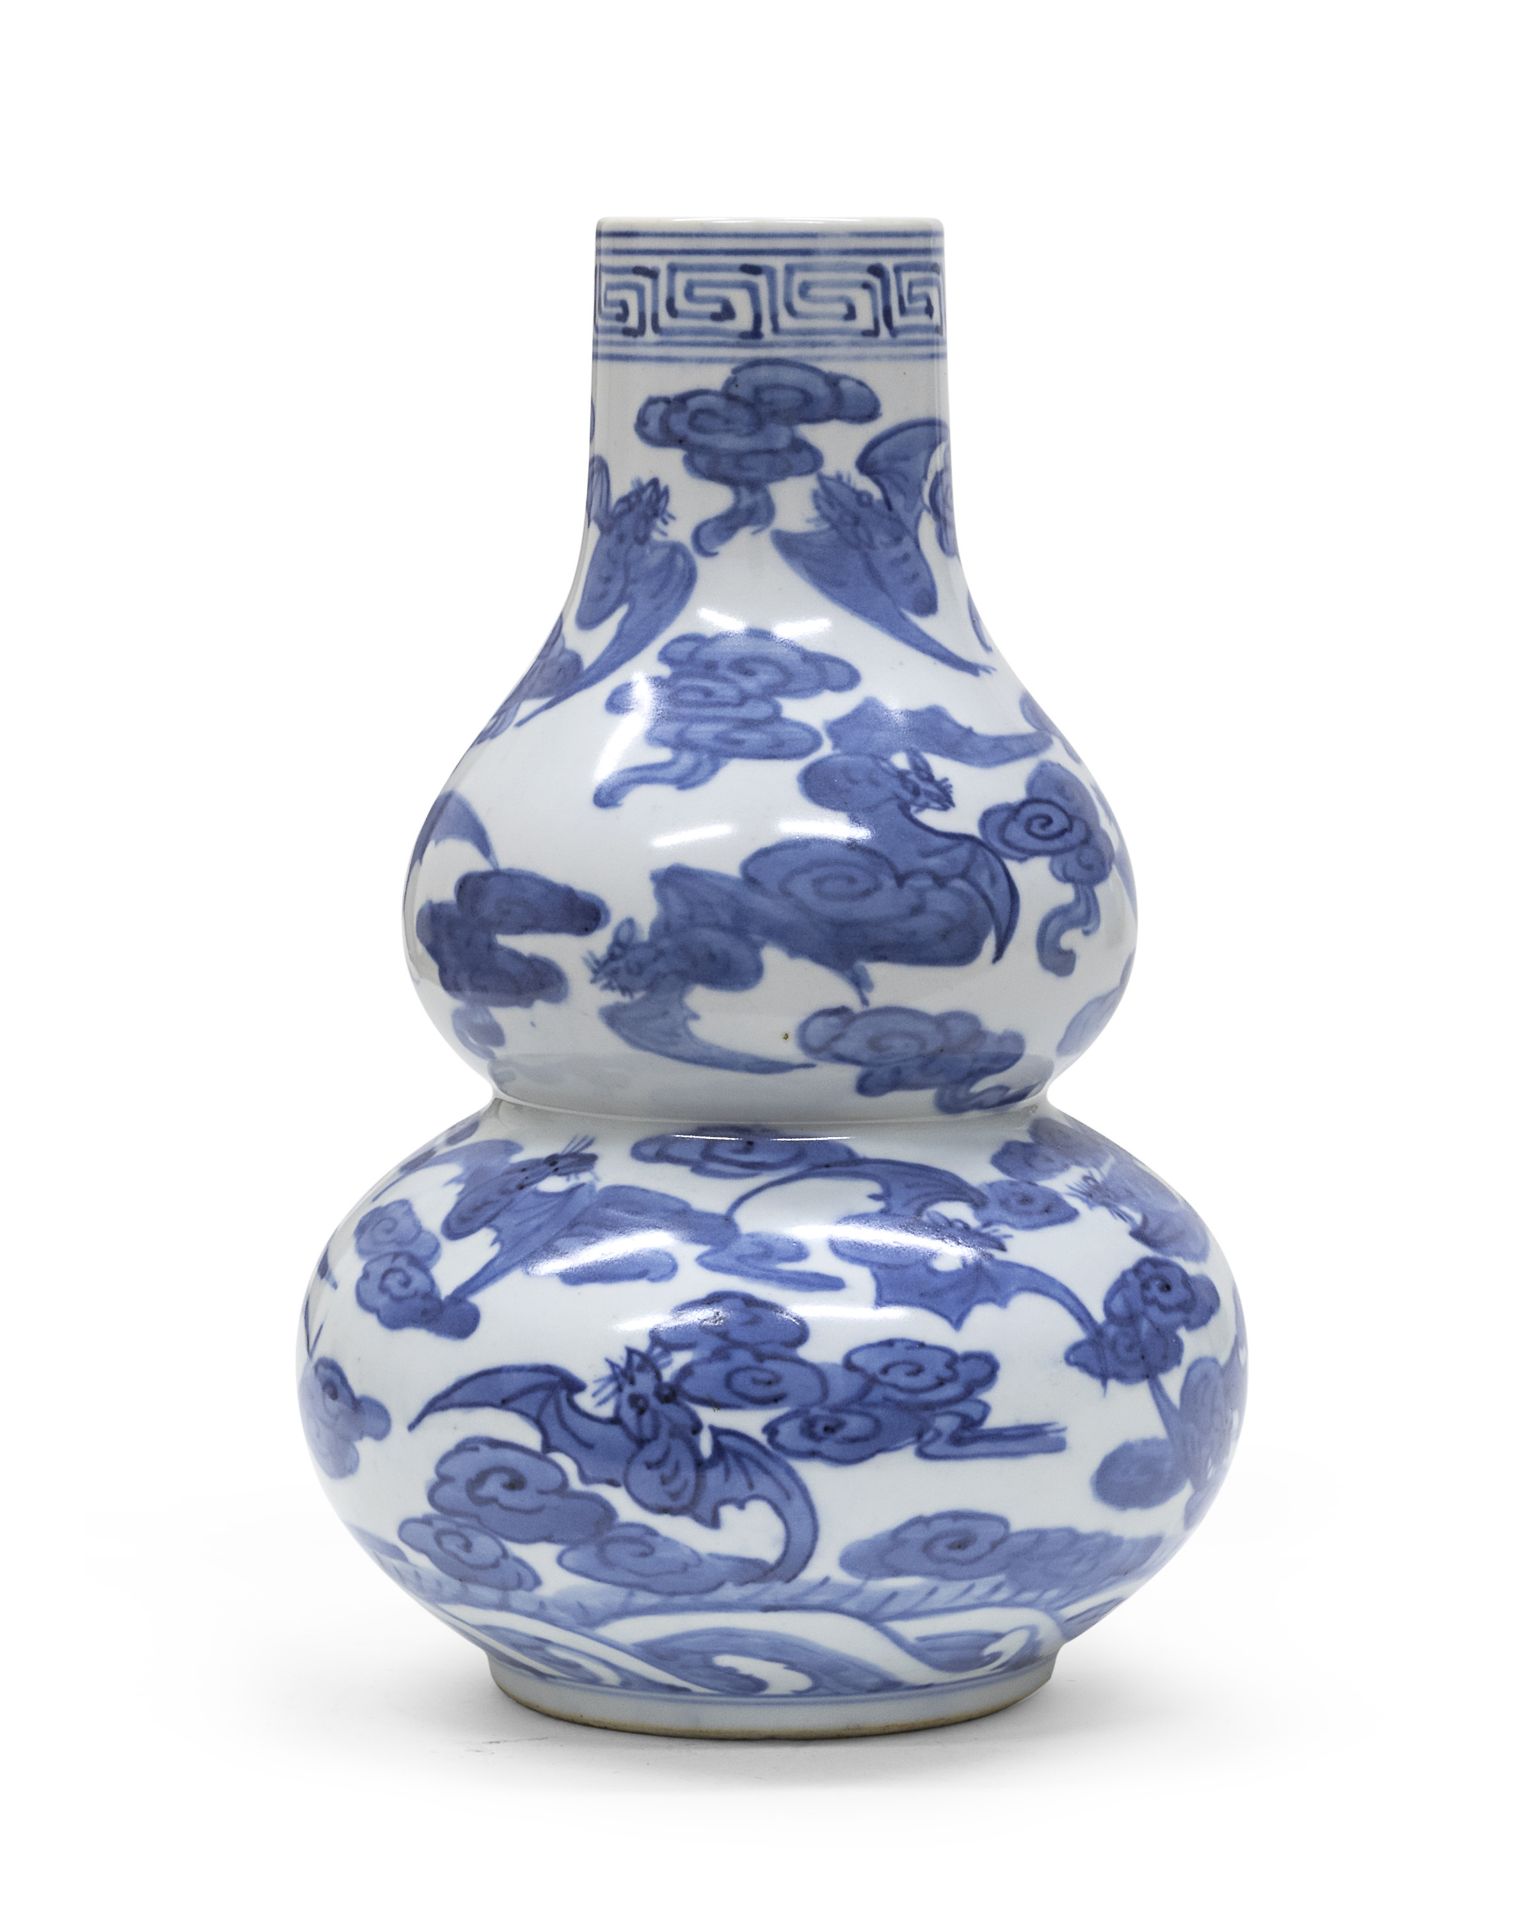 A CHINESE WHITE AND BLUE PORCELAIN VASE 20TH CENTURY